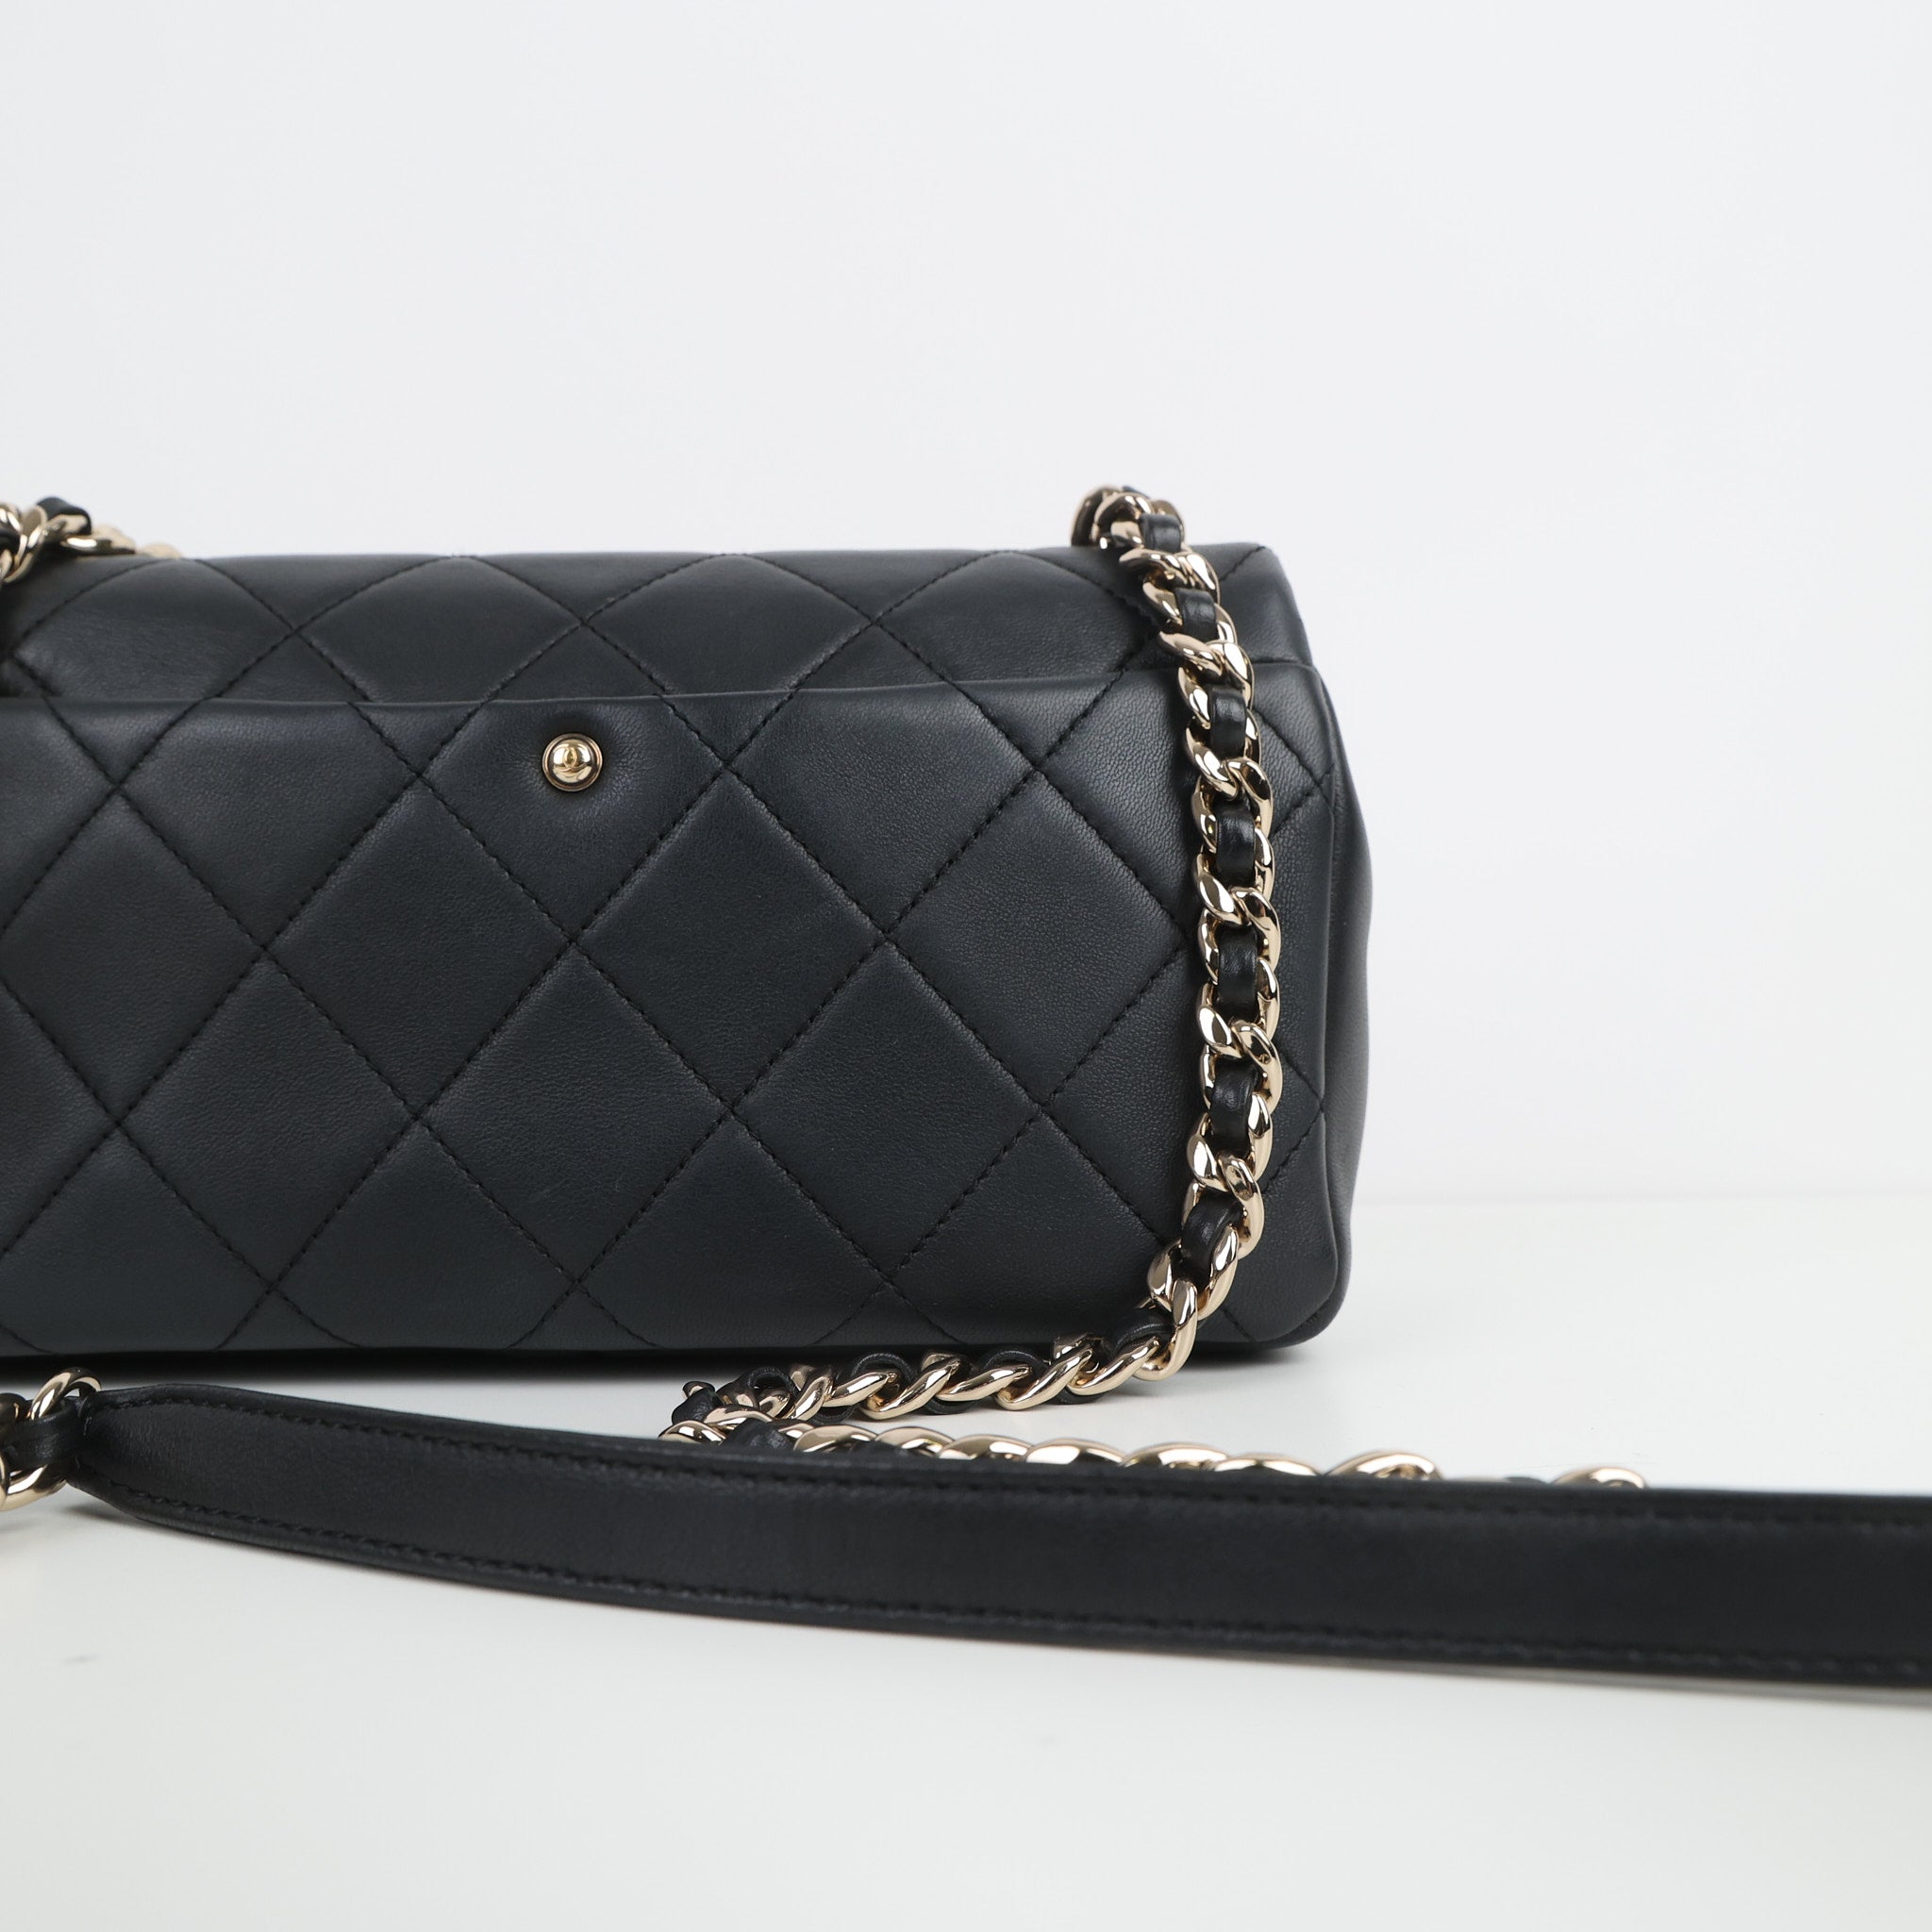 Blowing your bonus on a Chanel bag could be the most sensible purchase  youll make this Christmas  Fashion  The Guardian